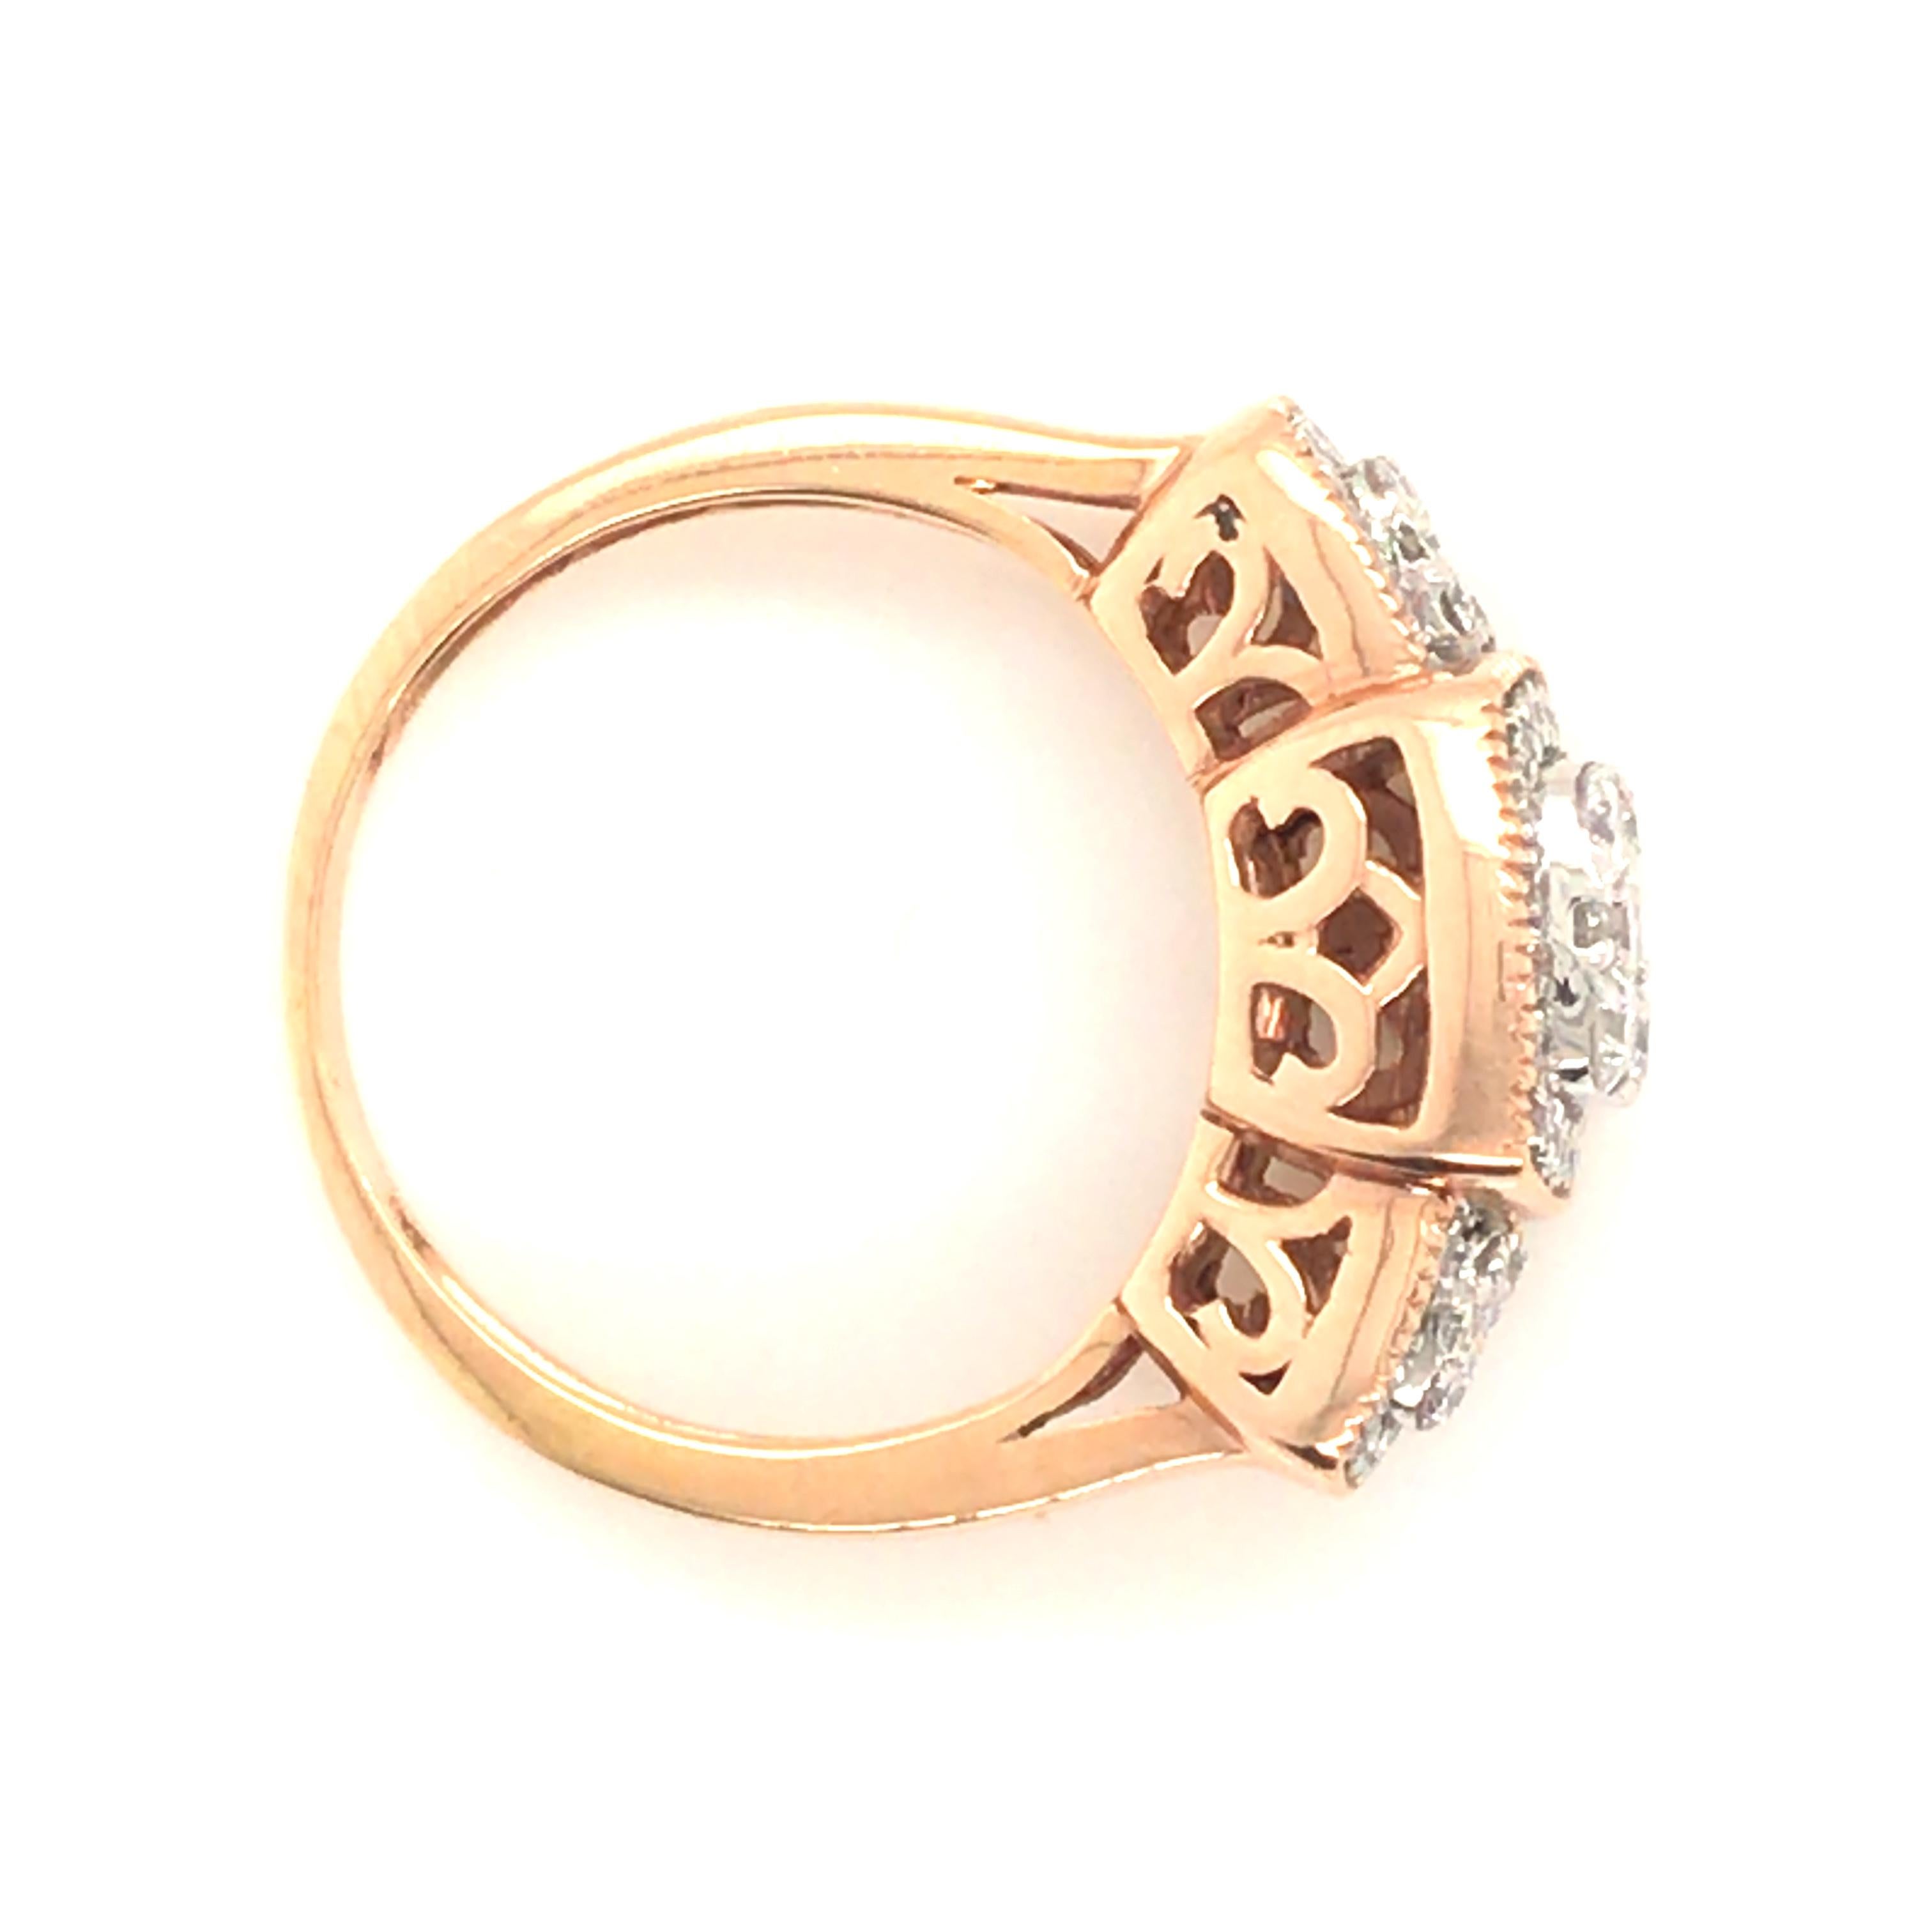 Bridal Diamond Ring with 14 Karat Rose Gold In New Condition For Sale In New York, NY